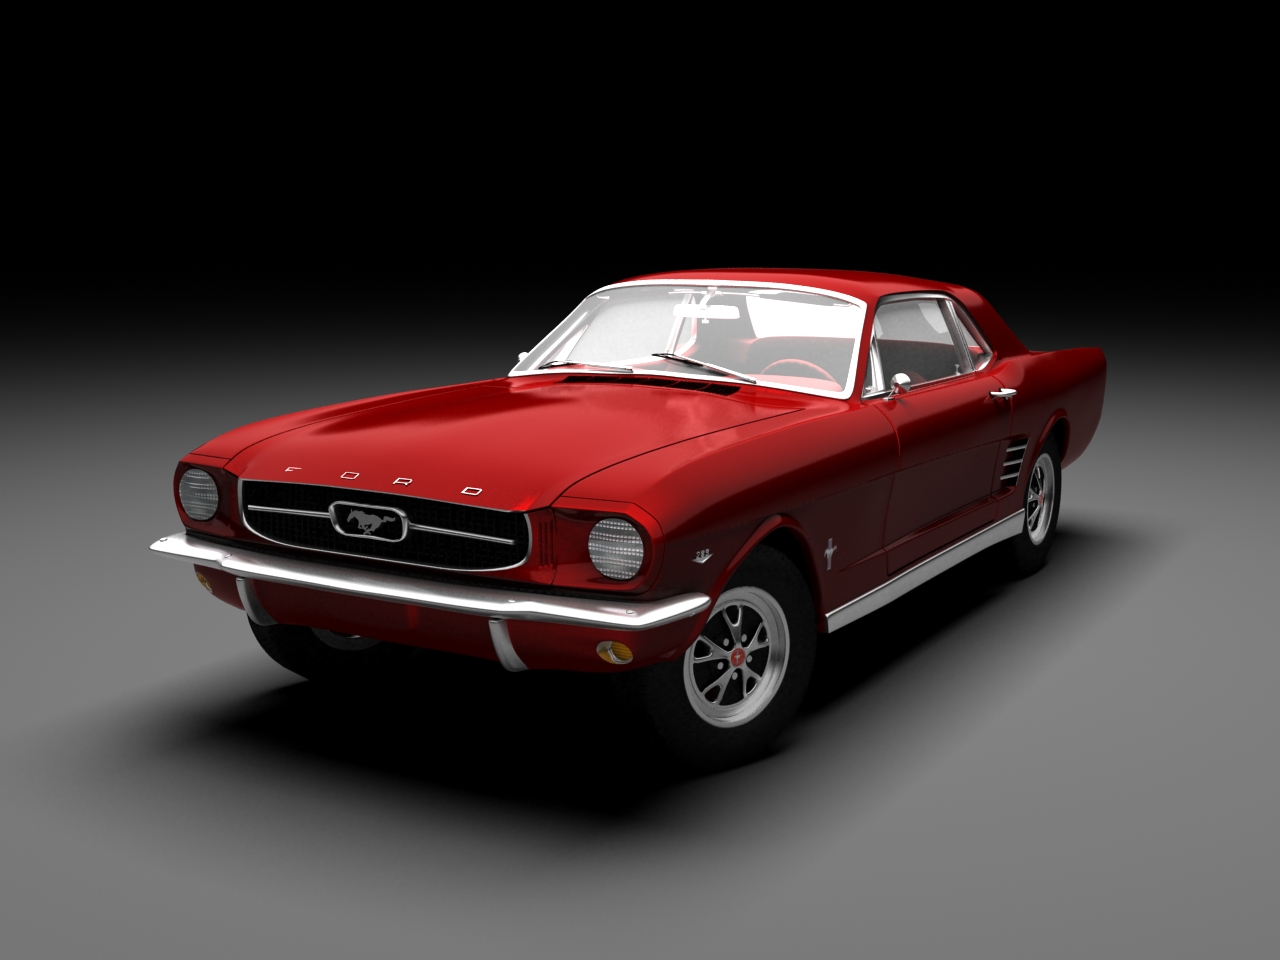 Ford Mustang Coupe By Elmias